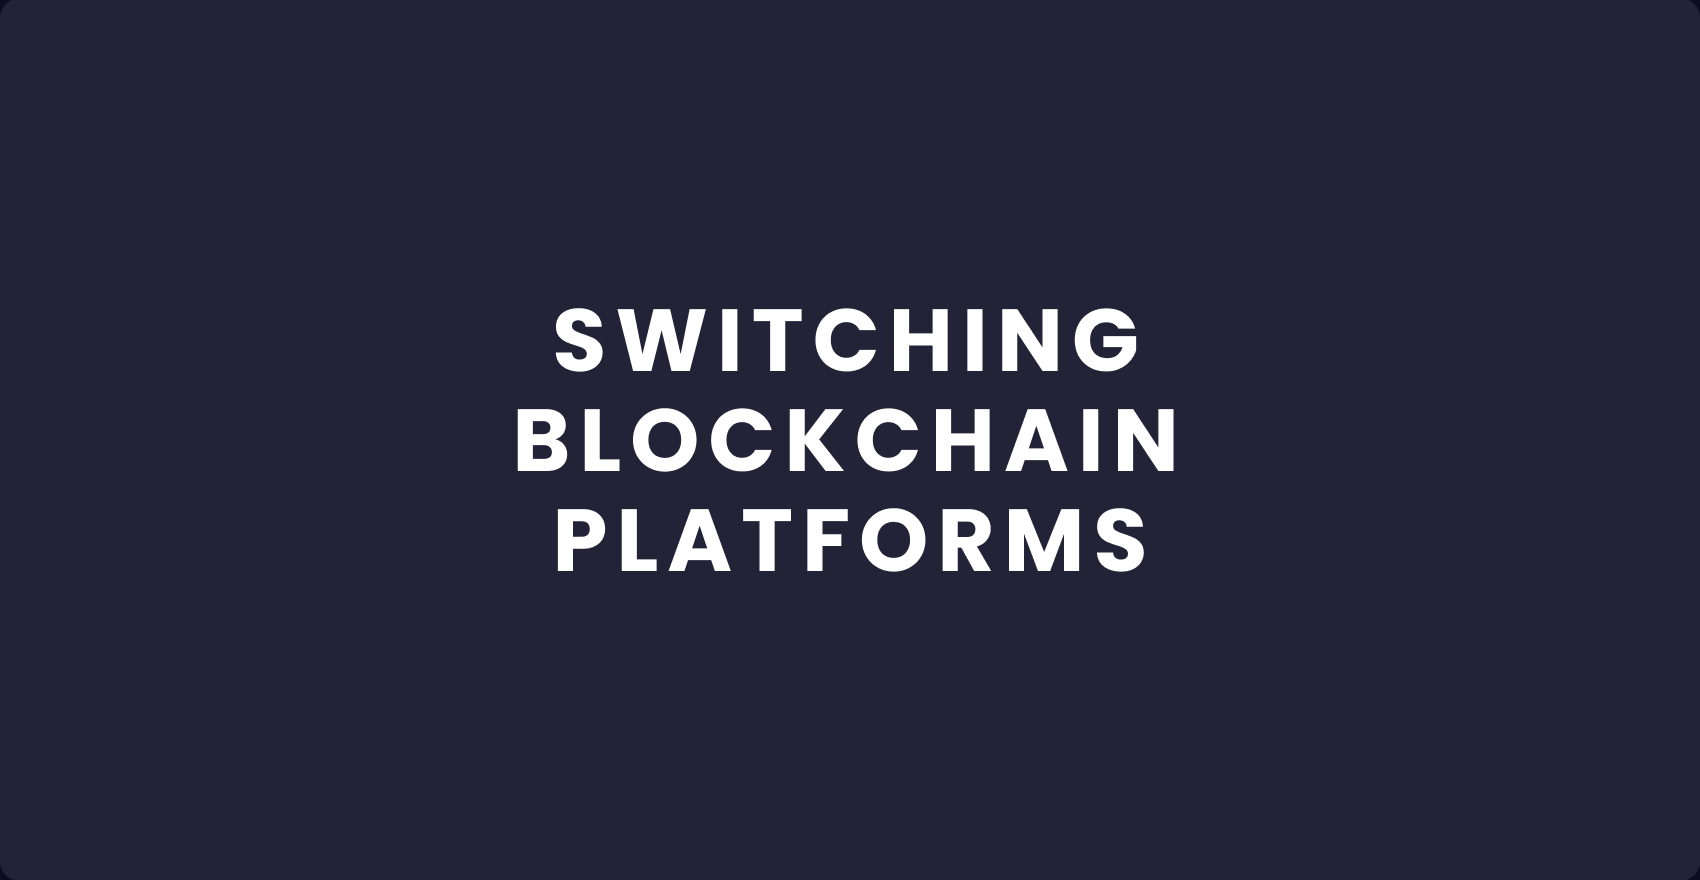 Switching Blockchain Platforms: Step-by-Step Guide to Move Your dApp from Ethereum to Bitcoin or Cosmos